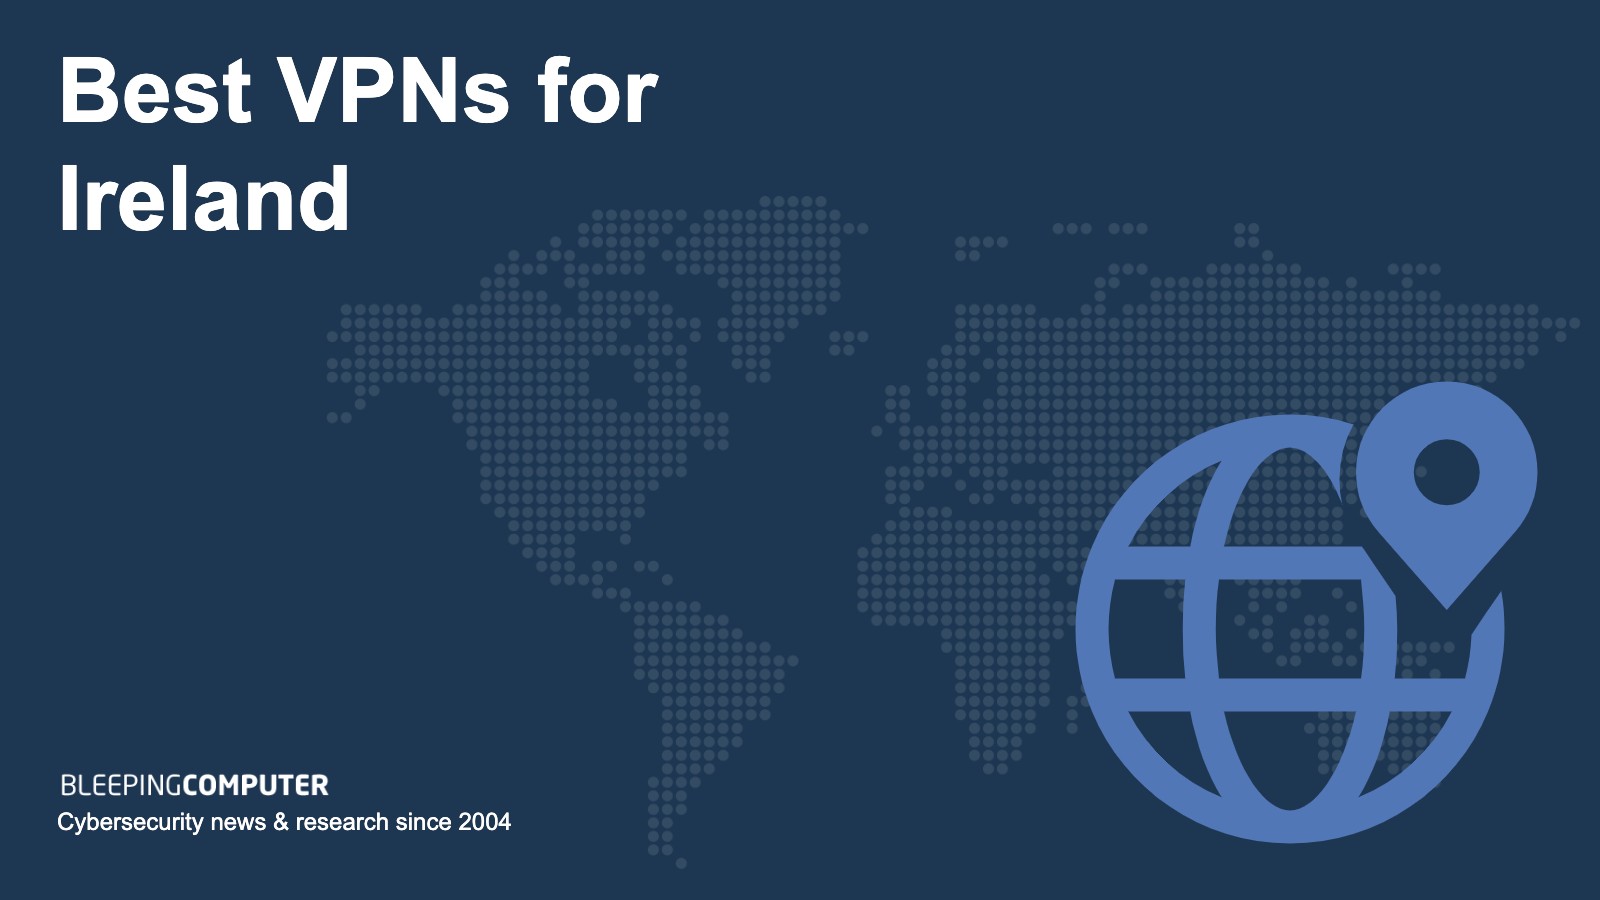 The Best VPNs for Ireland